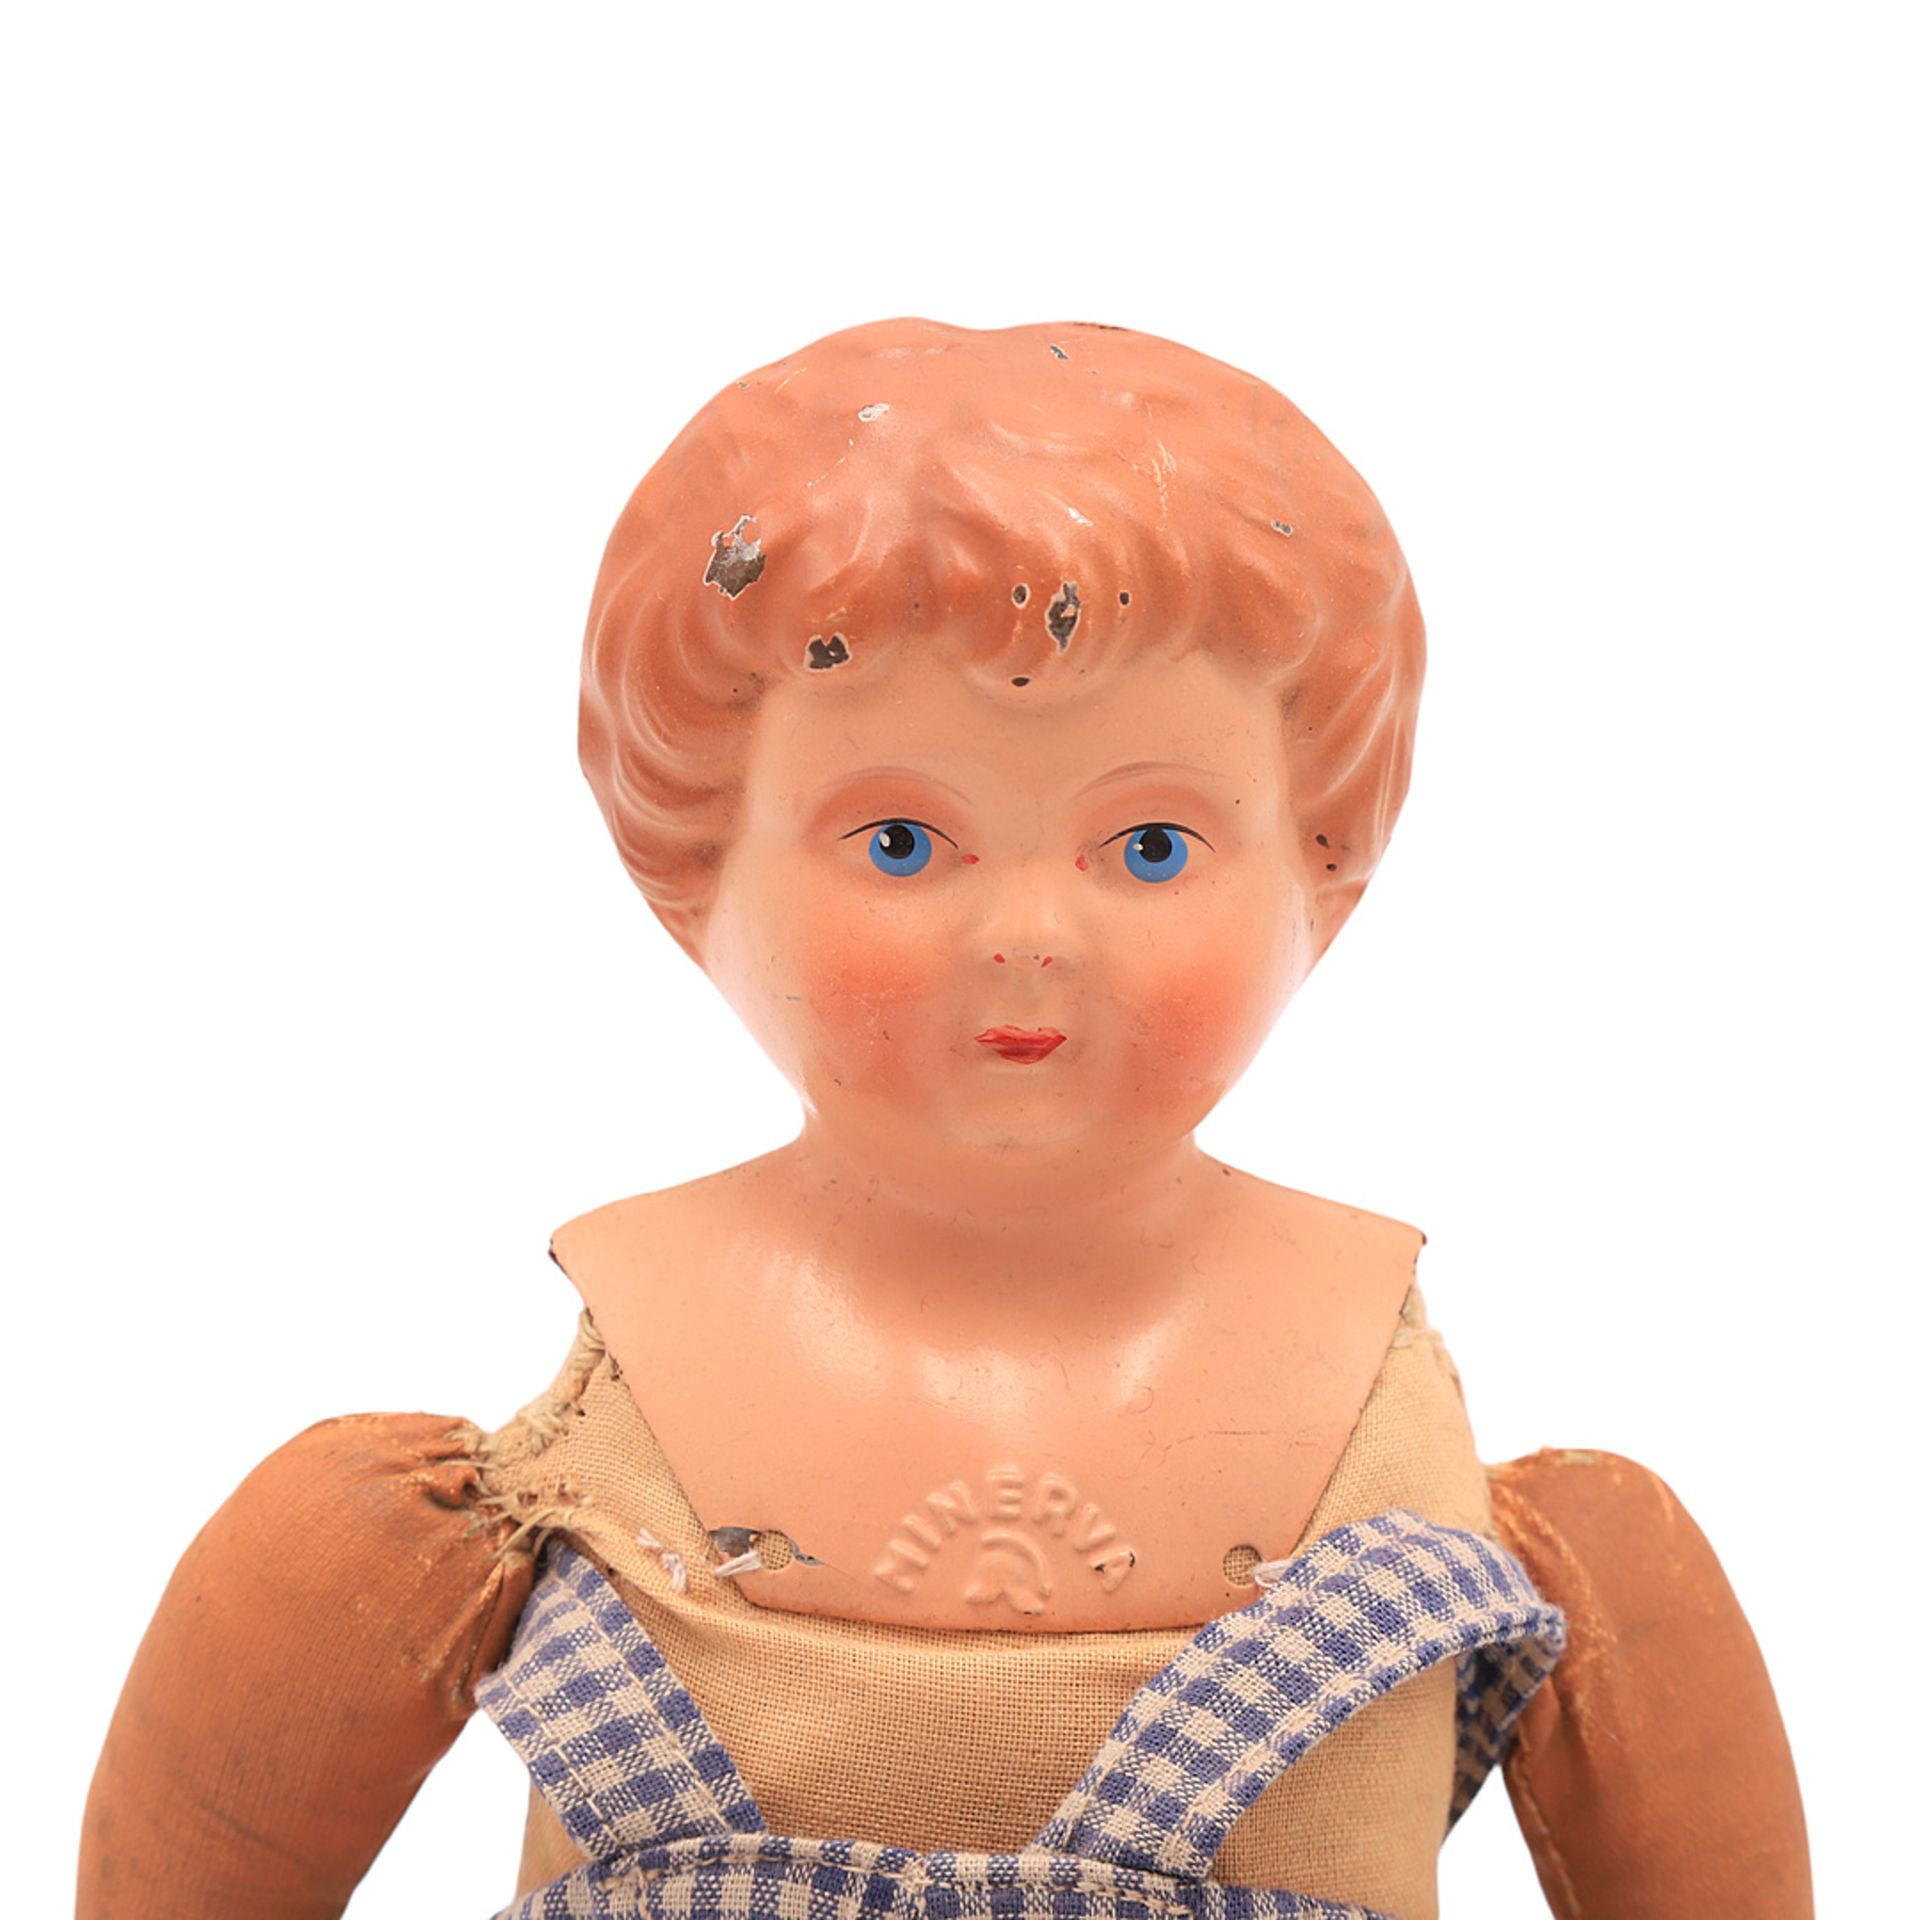 Buschow & Beck / Minerva doll, 1st half of the 20th century - Image 4 of 4